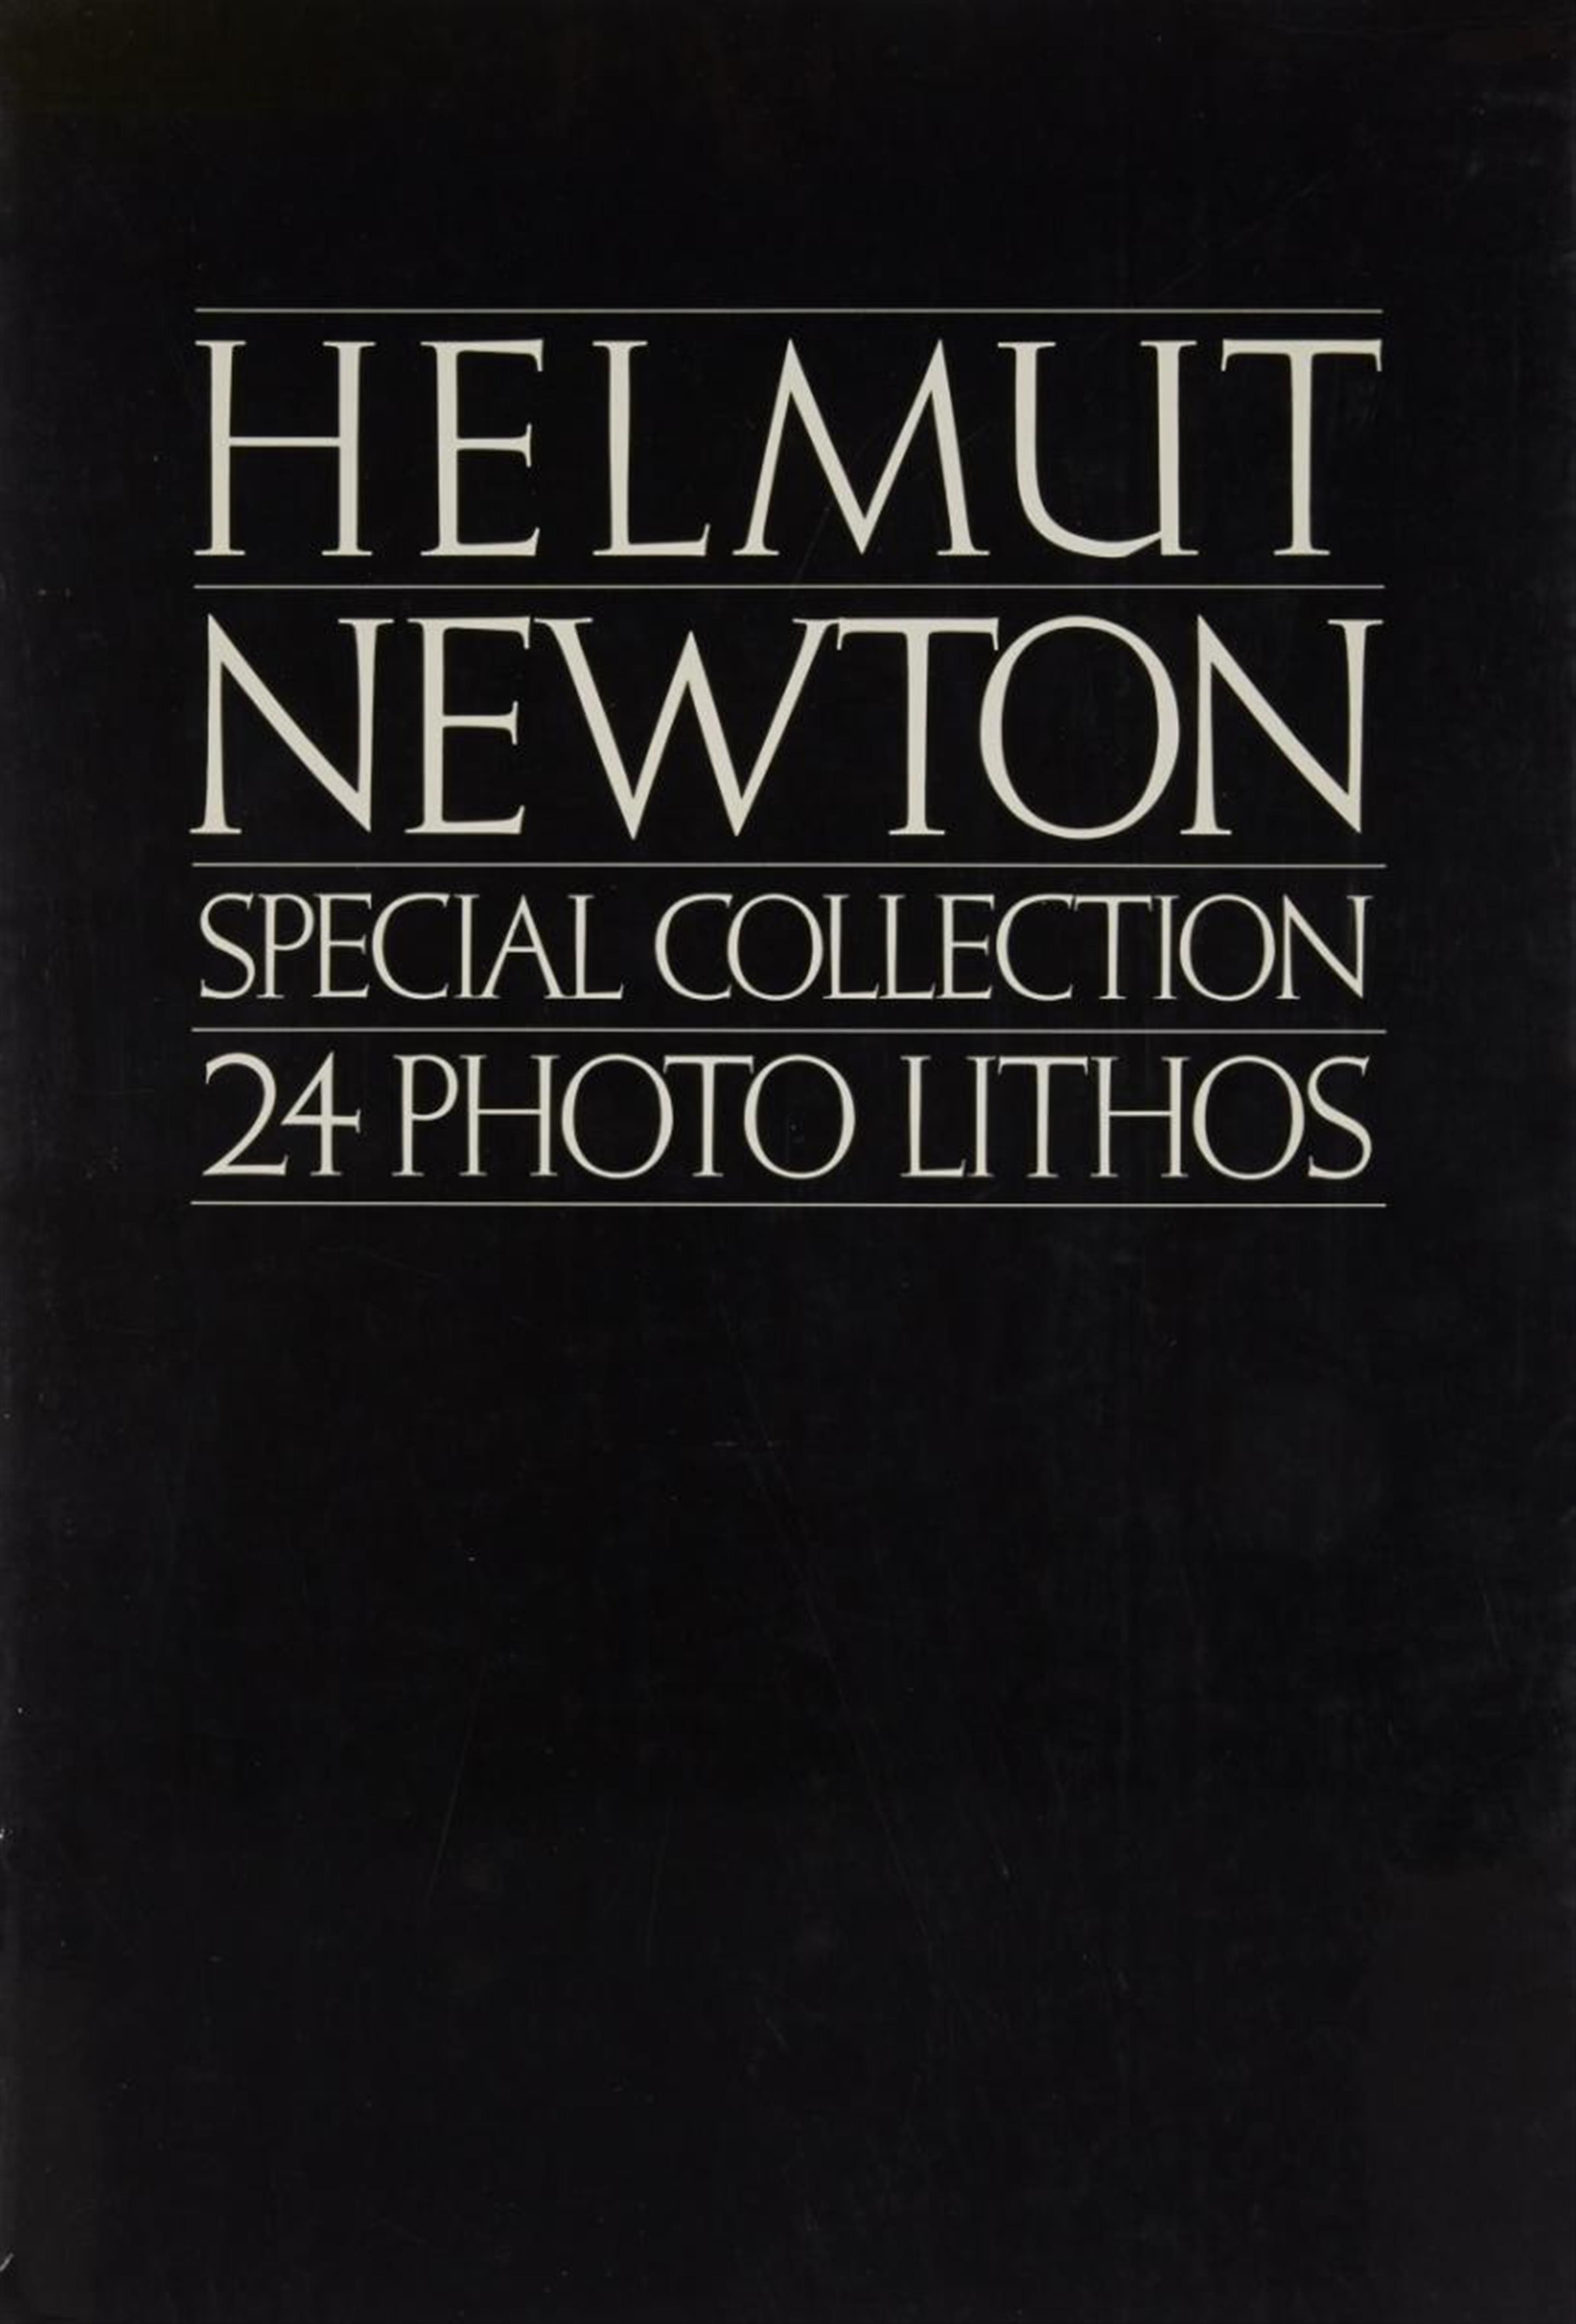 Helmut Newton - Special Collection. 24 Photo Lithos - image-1